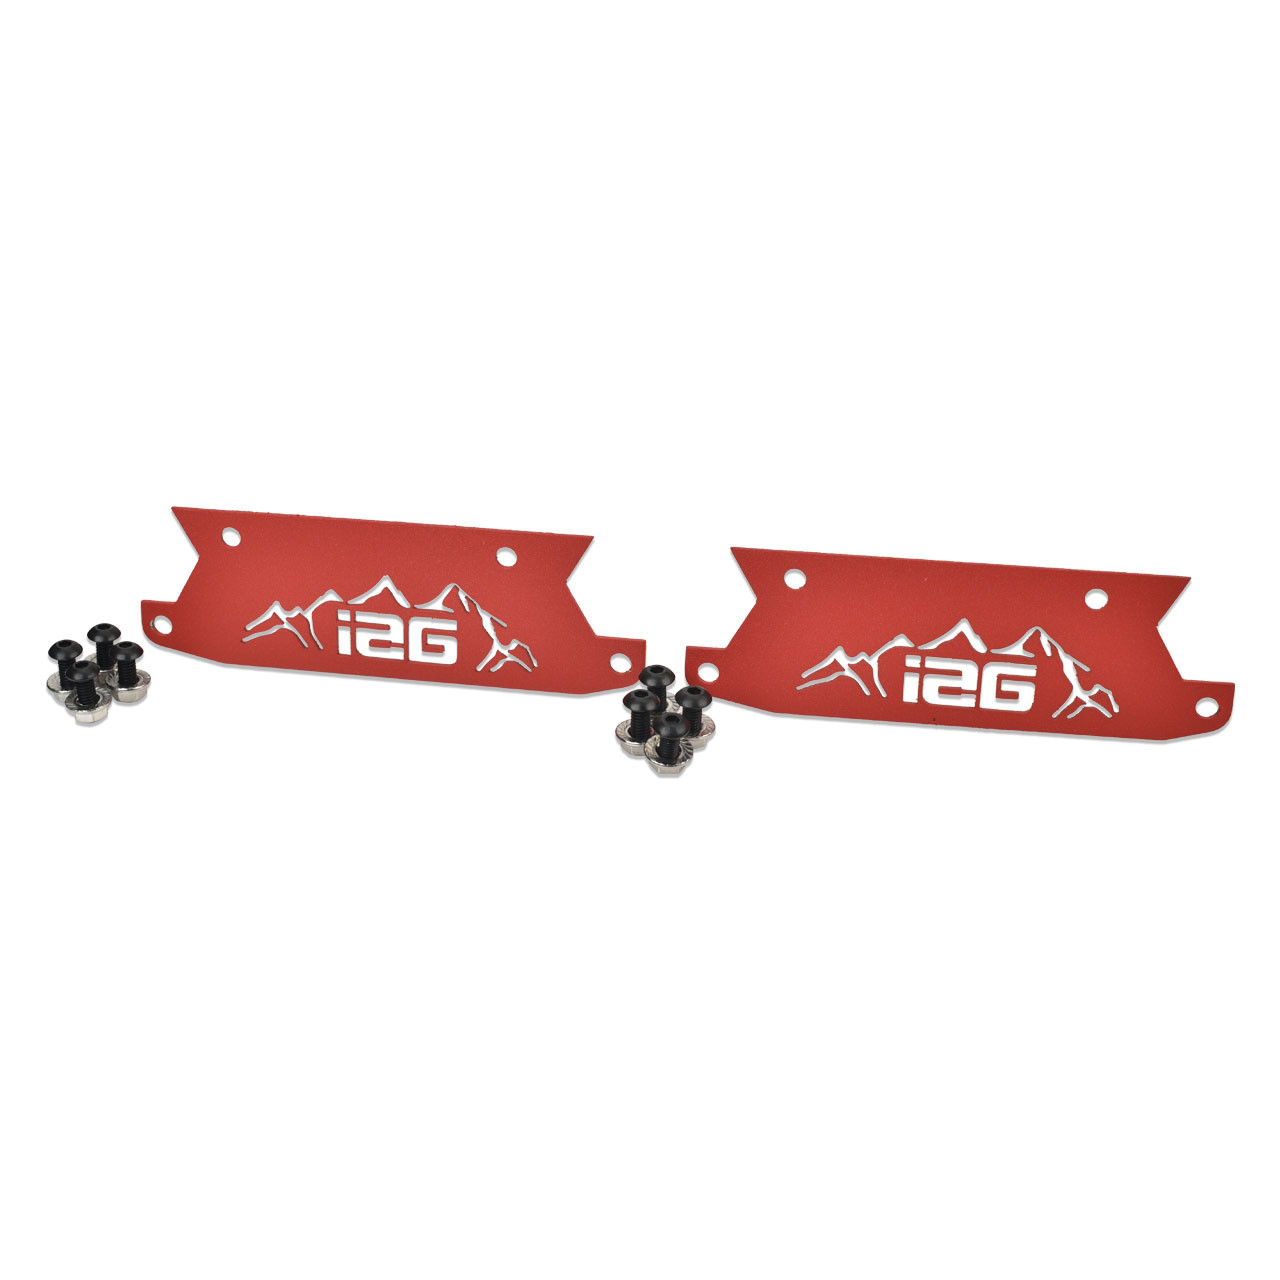 IAG Off-Road Color Logo Plate - Red Finish